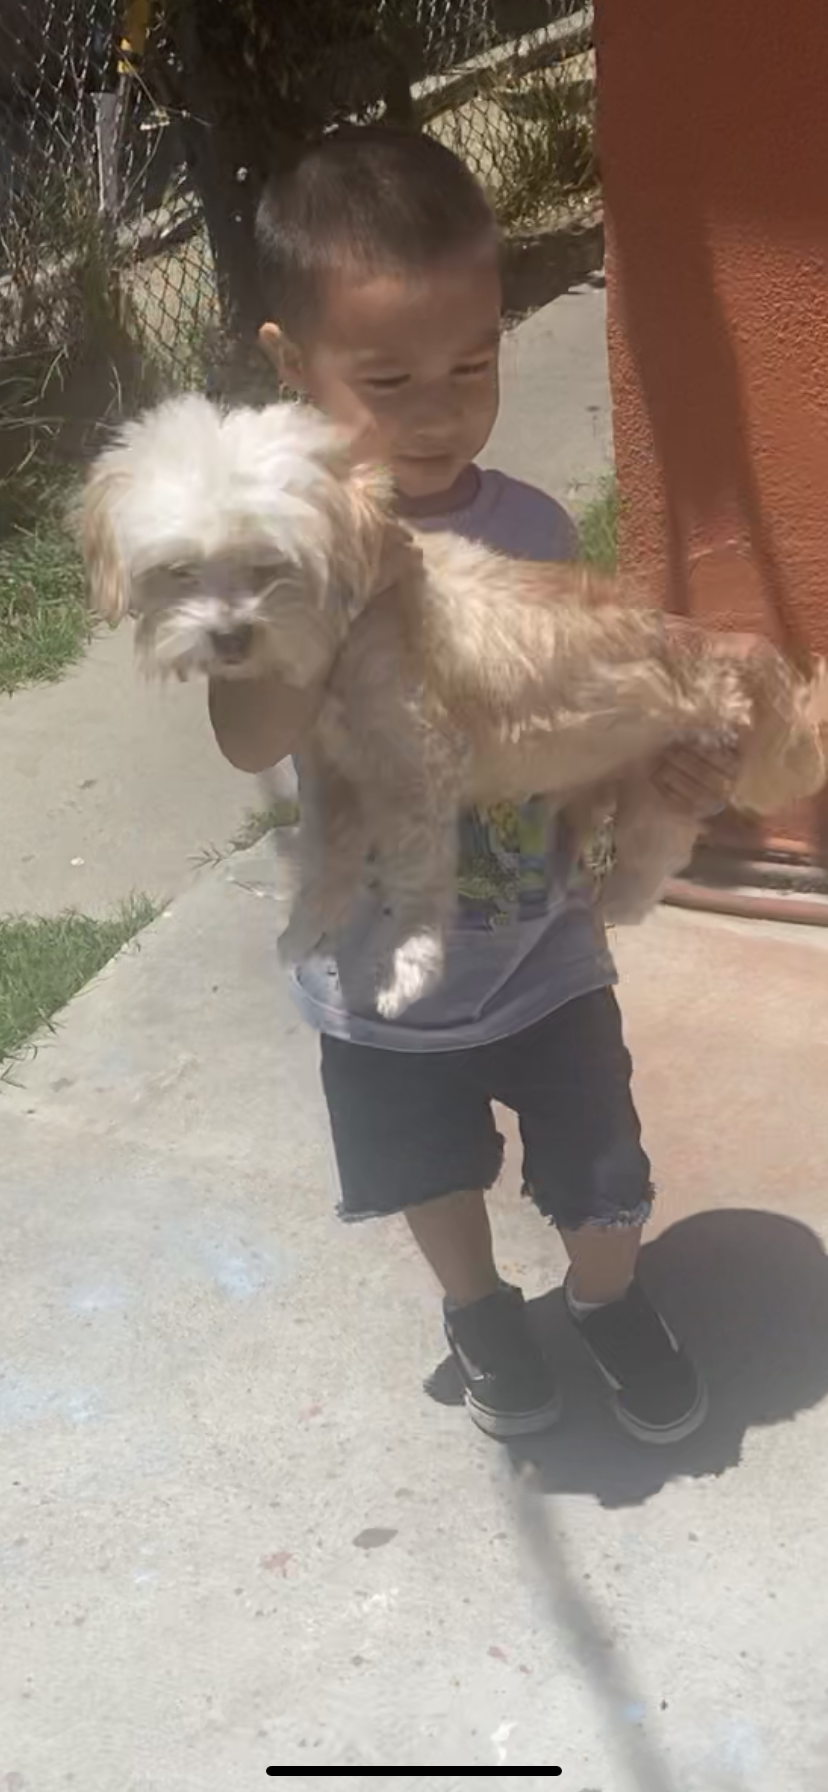 Image of Shorty, Lost Dog